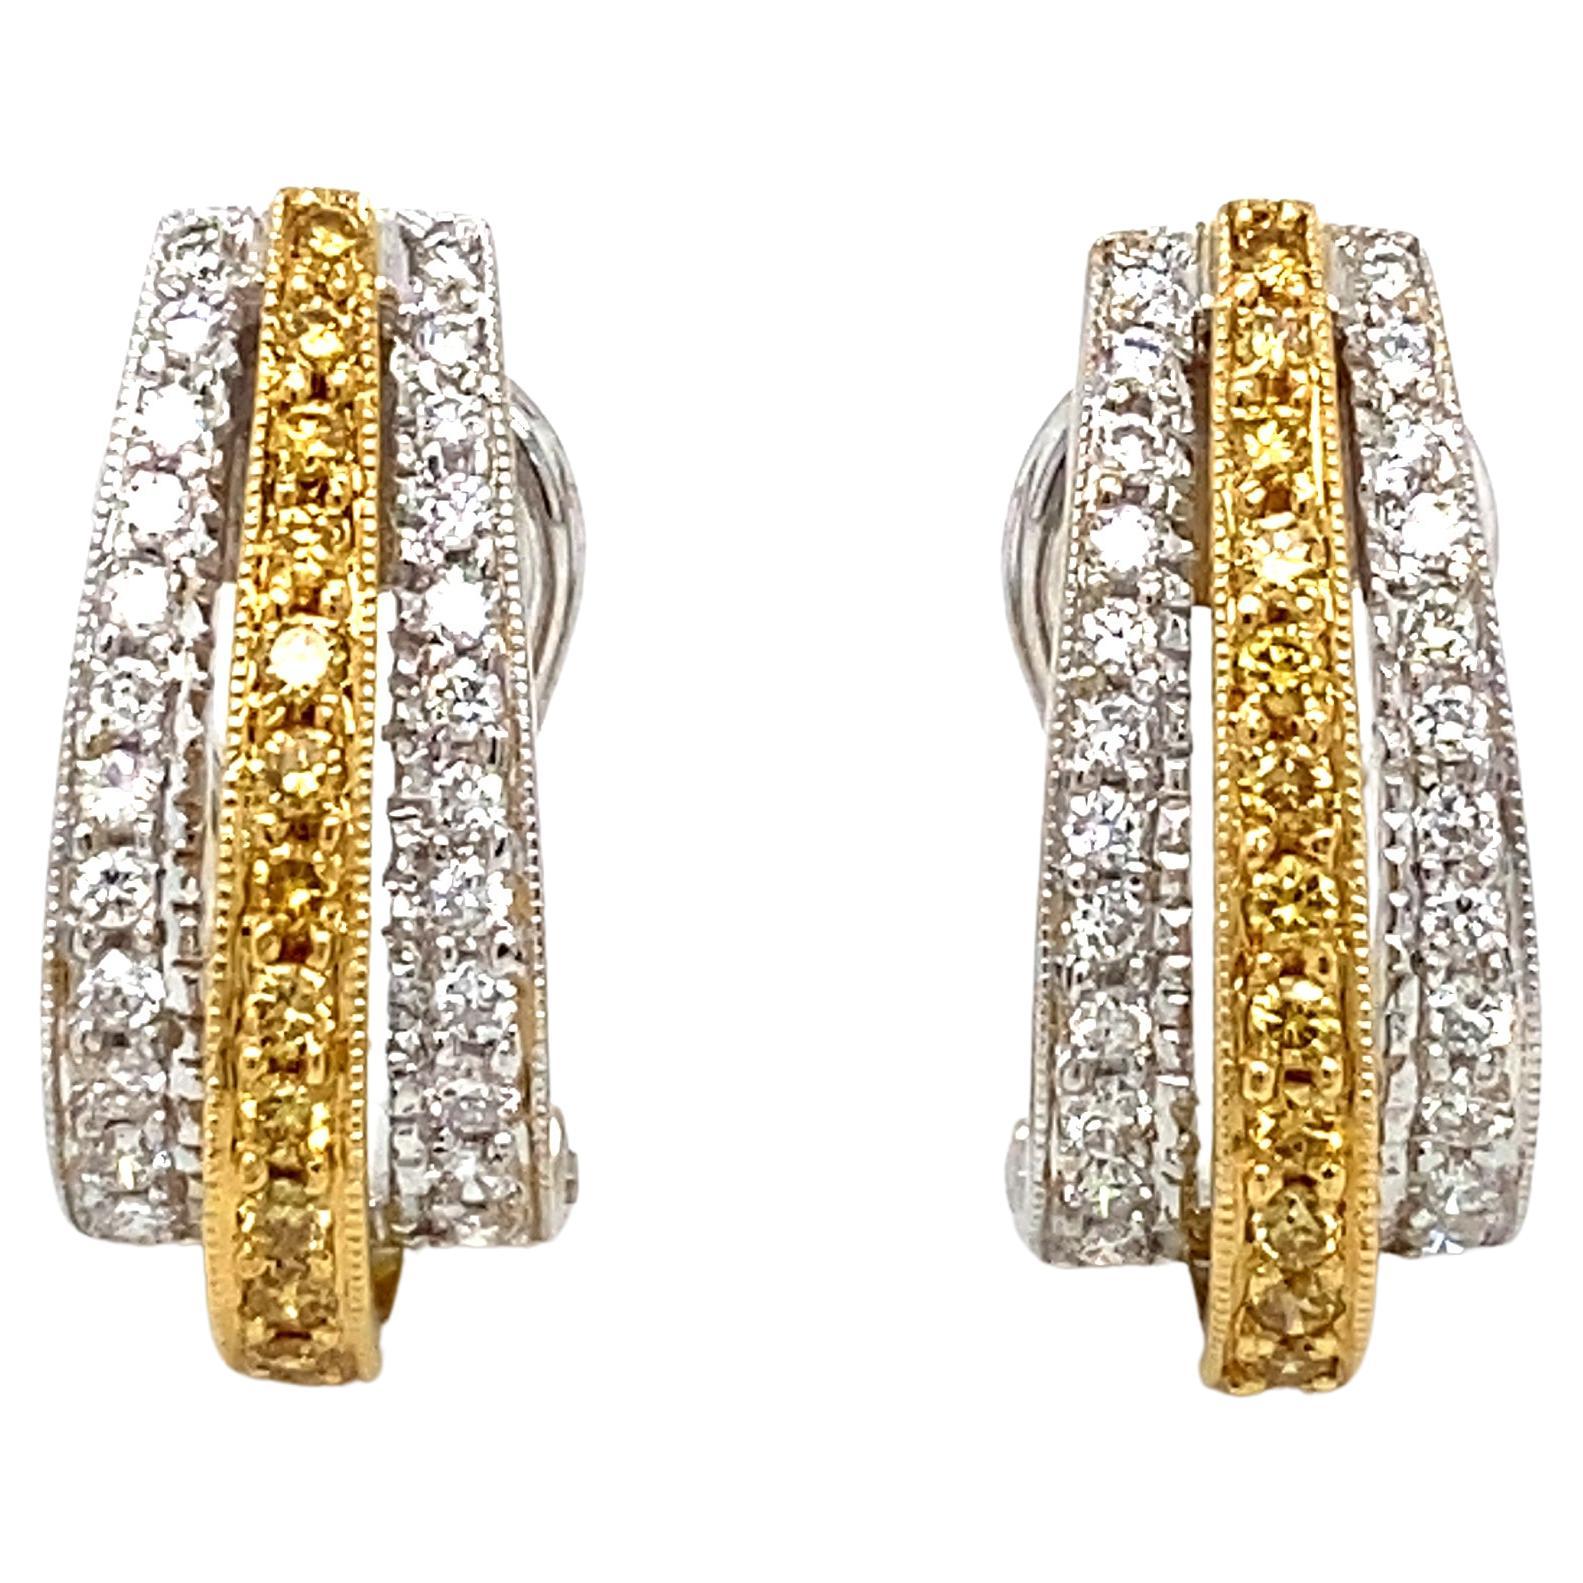 Circa 2010s 2.0 Carat Yellow and White Diamond Earrings in 18 Karat Gold  For Sale